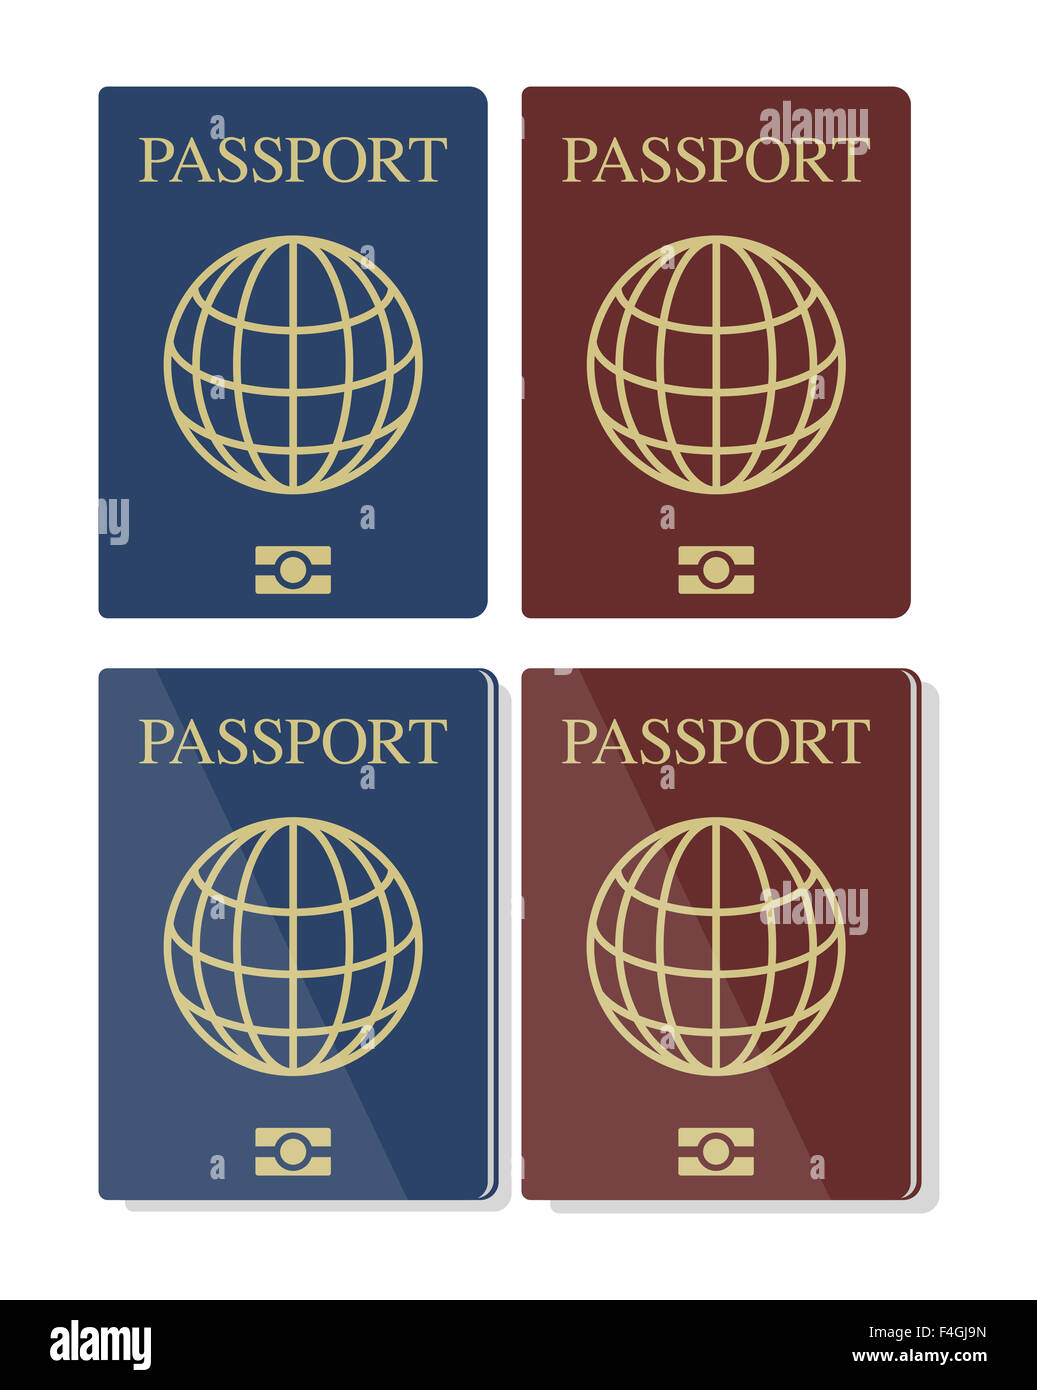 Vector set of blue and red biometric passports with globe, eps10, isolated on white background Stock Photo